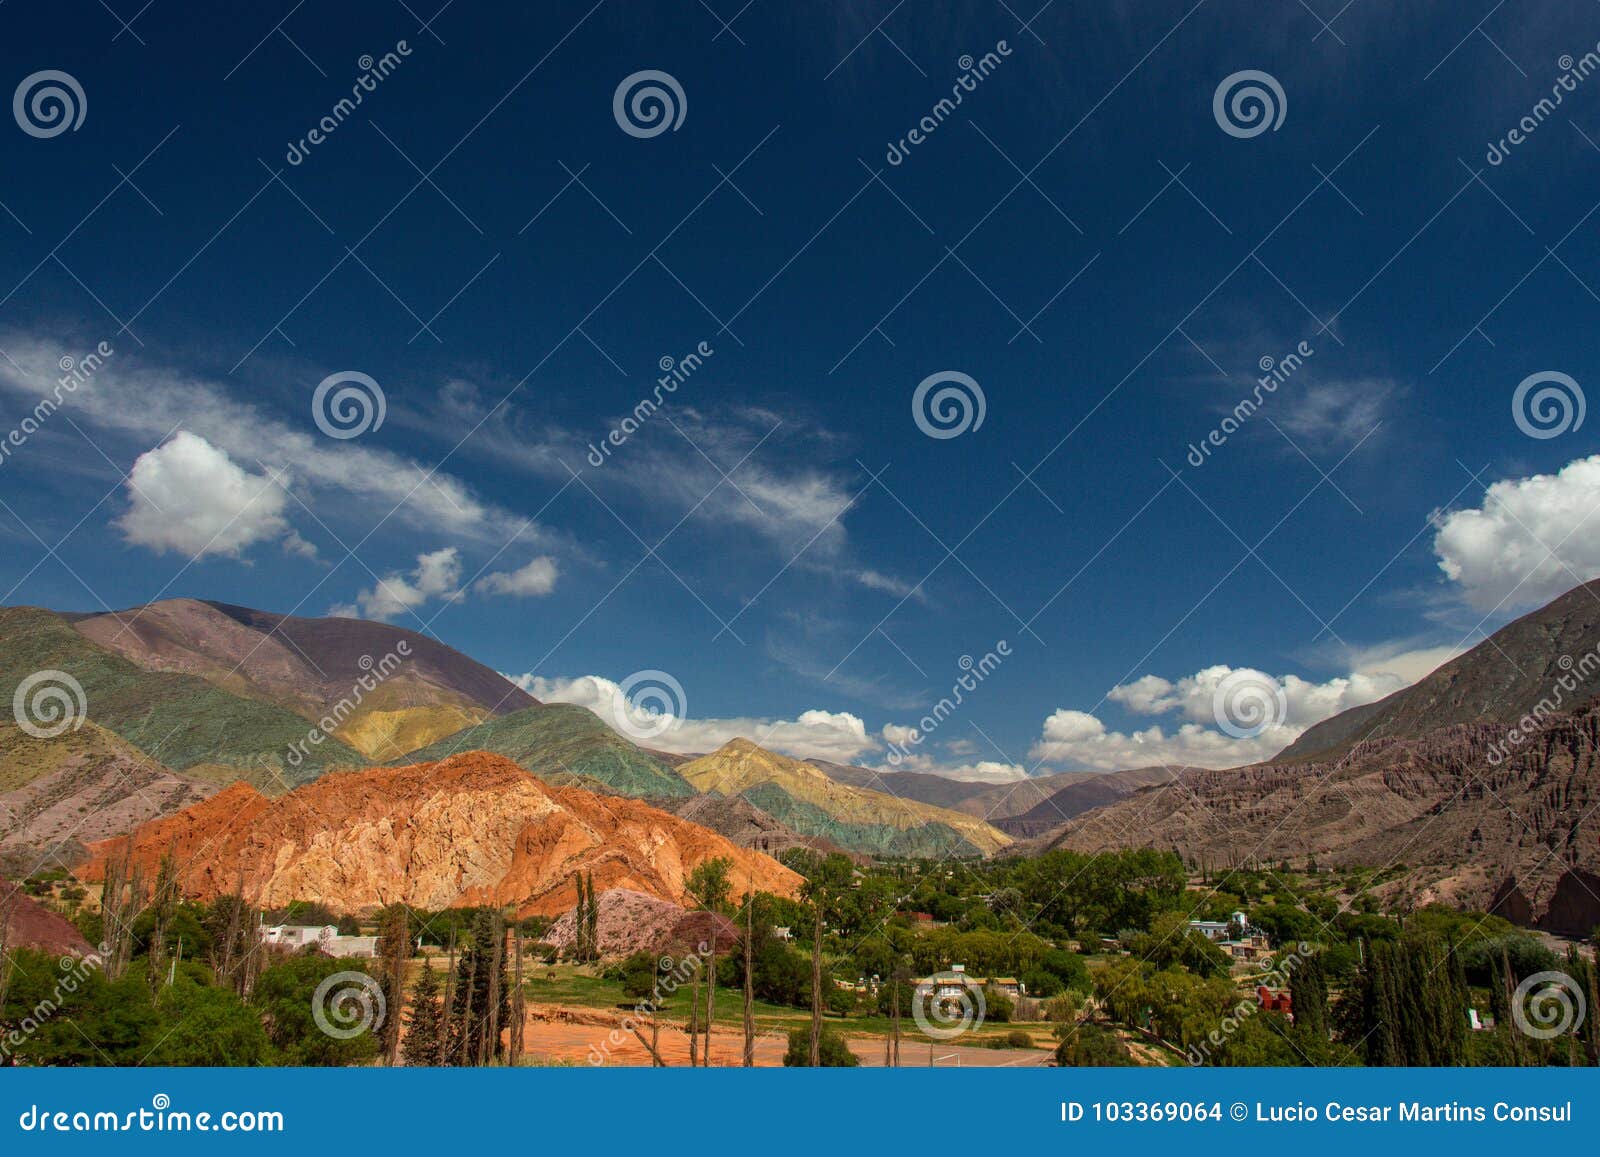 The Hill of Seven Colors. Colorful Mountains in Purmamarca, Jujuy